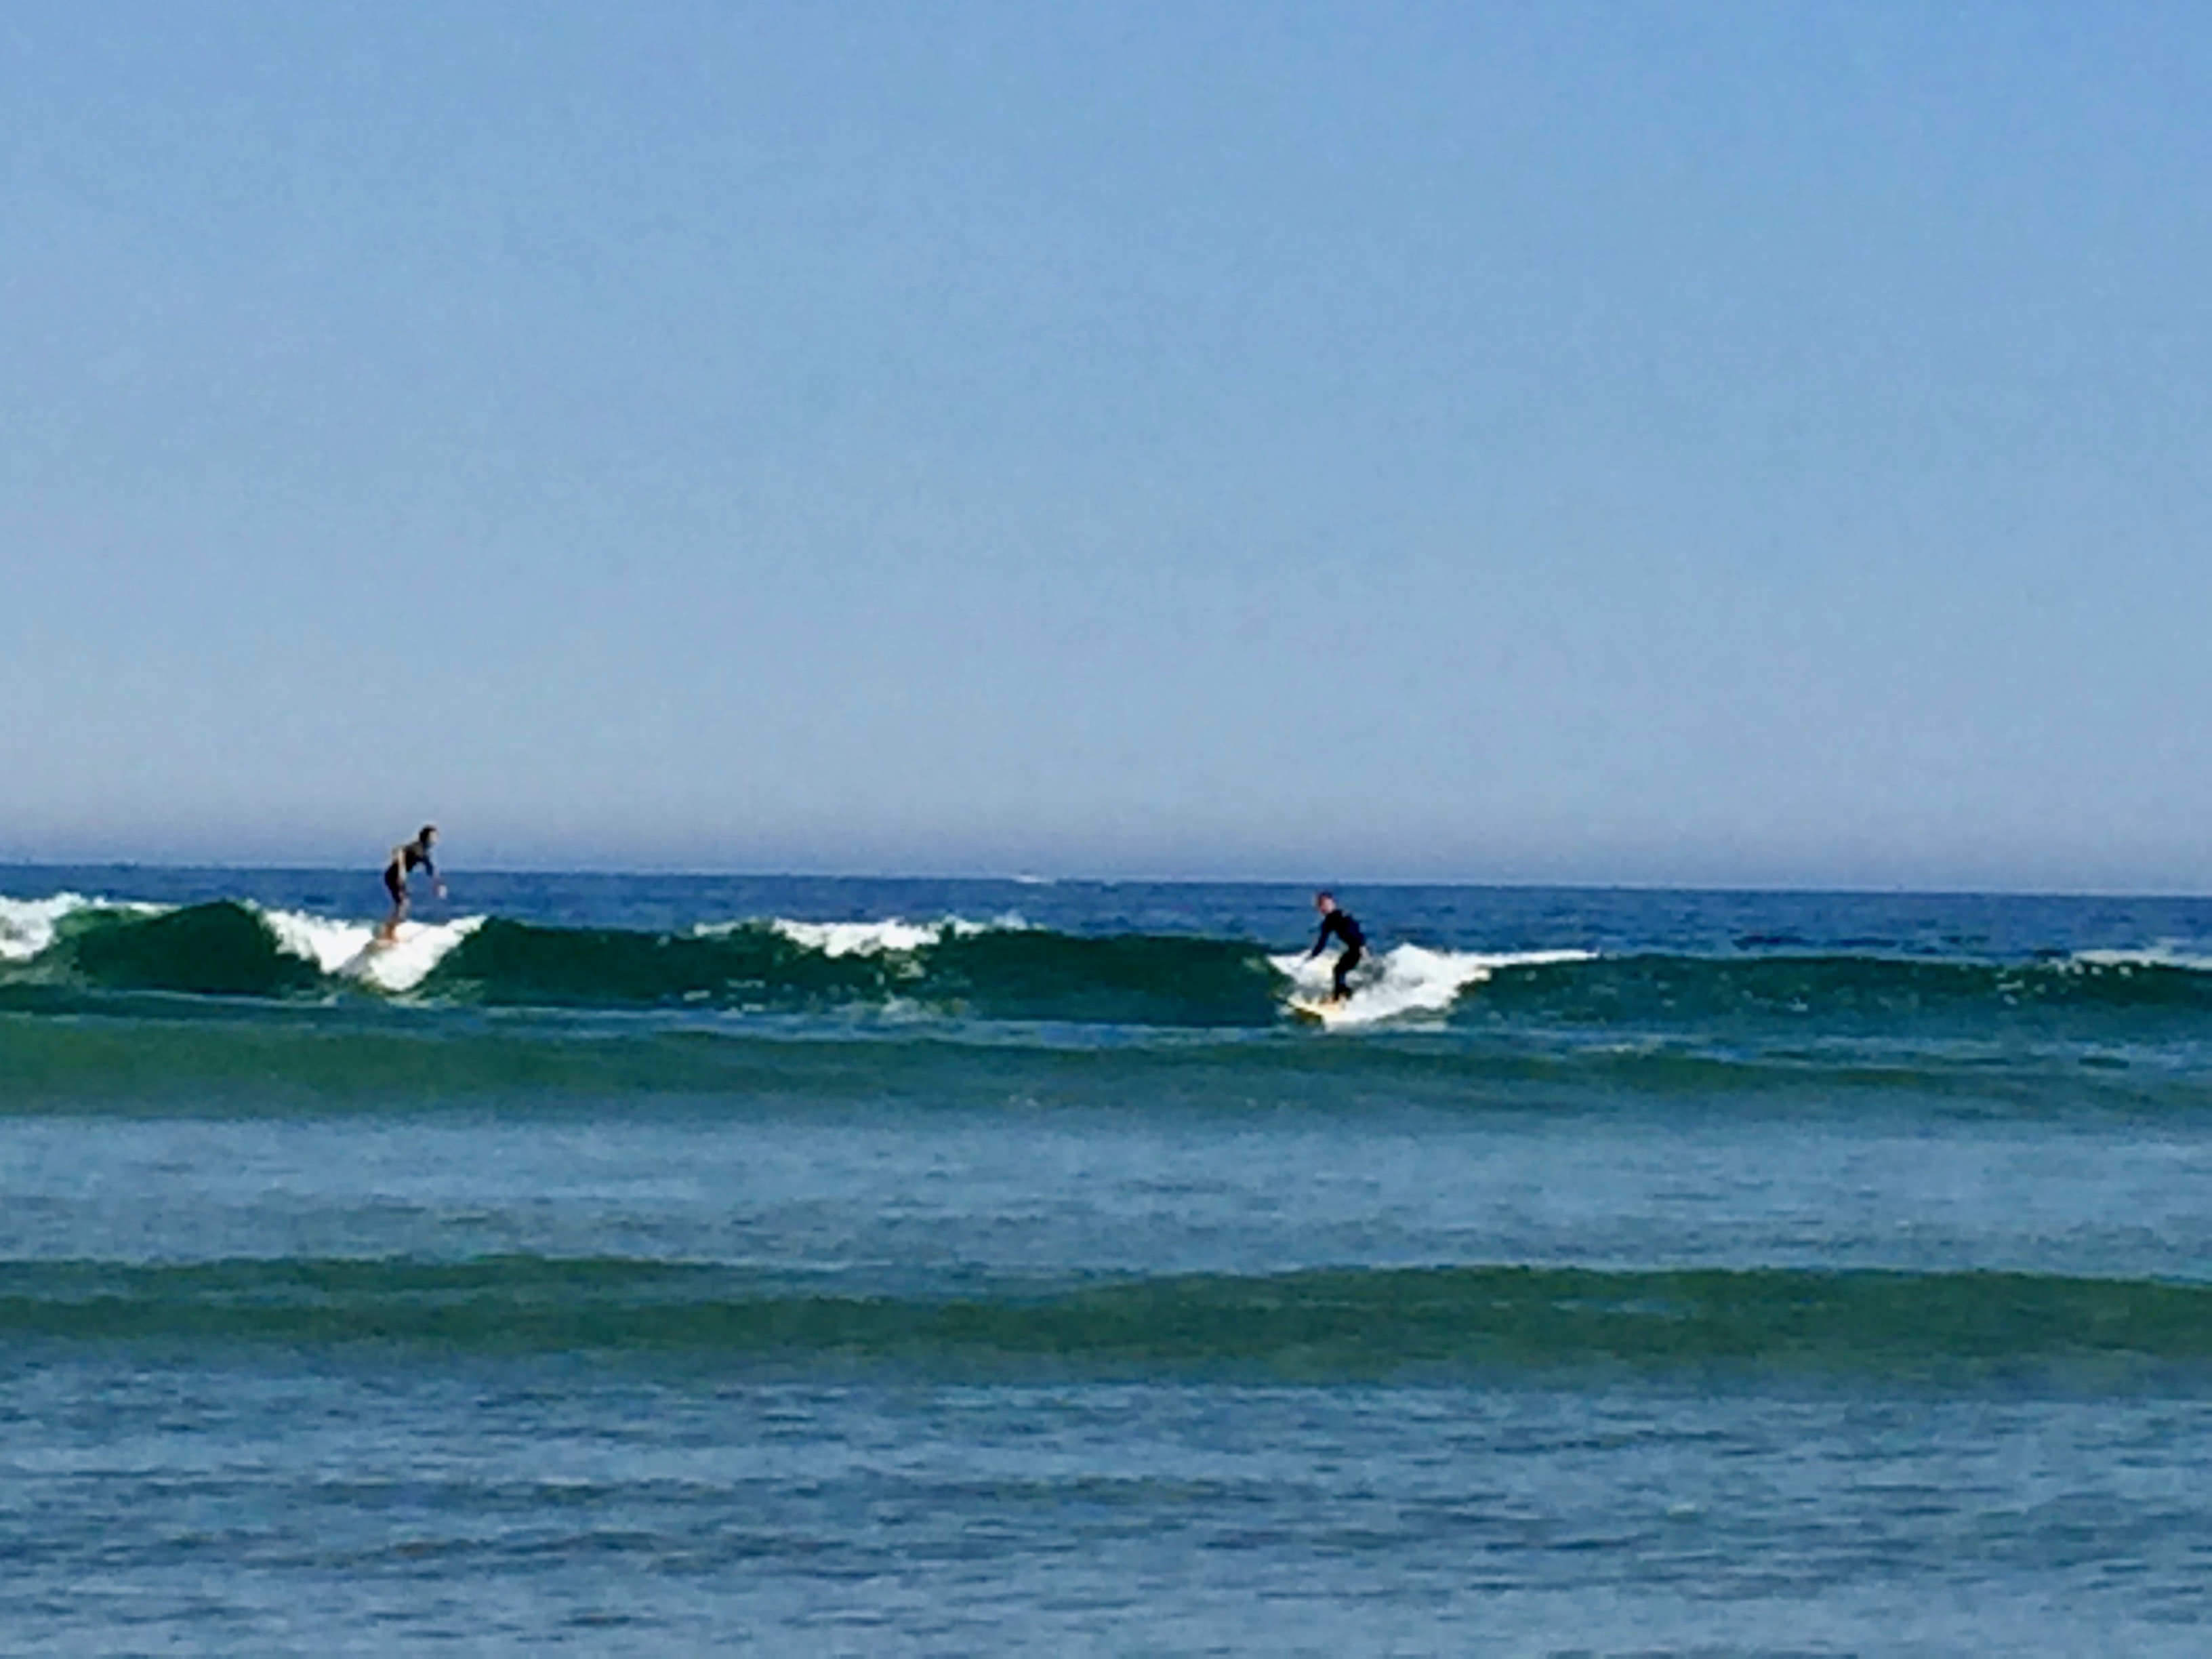 It's the weekend, Number 69. Surfers at Good Harbor Beach, Gloucester MA